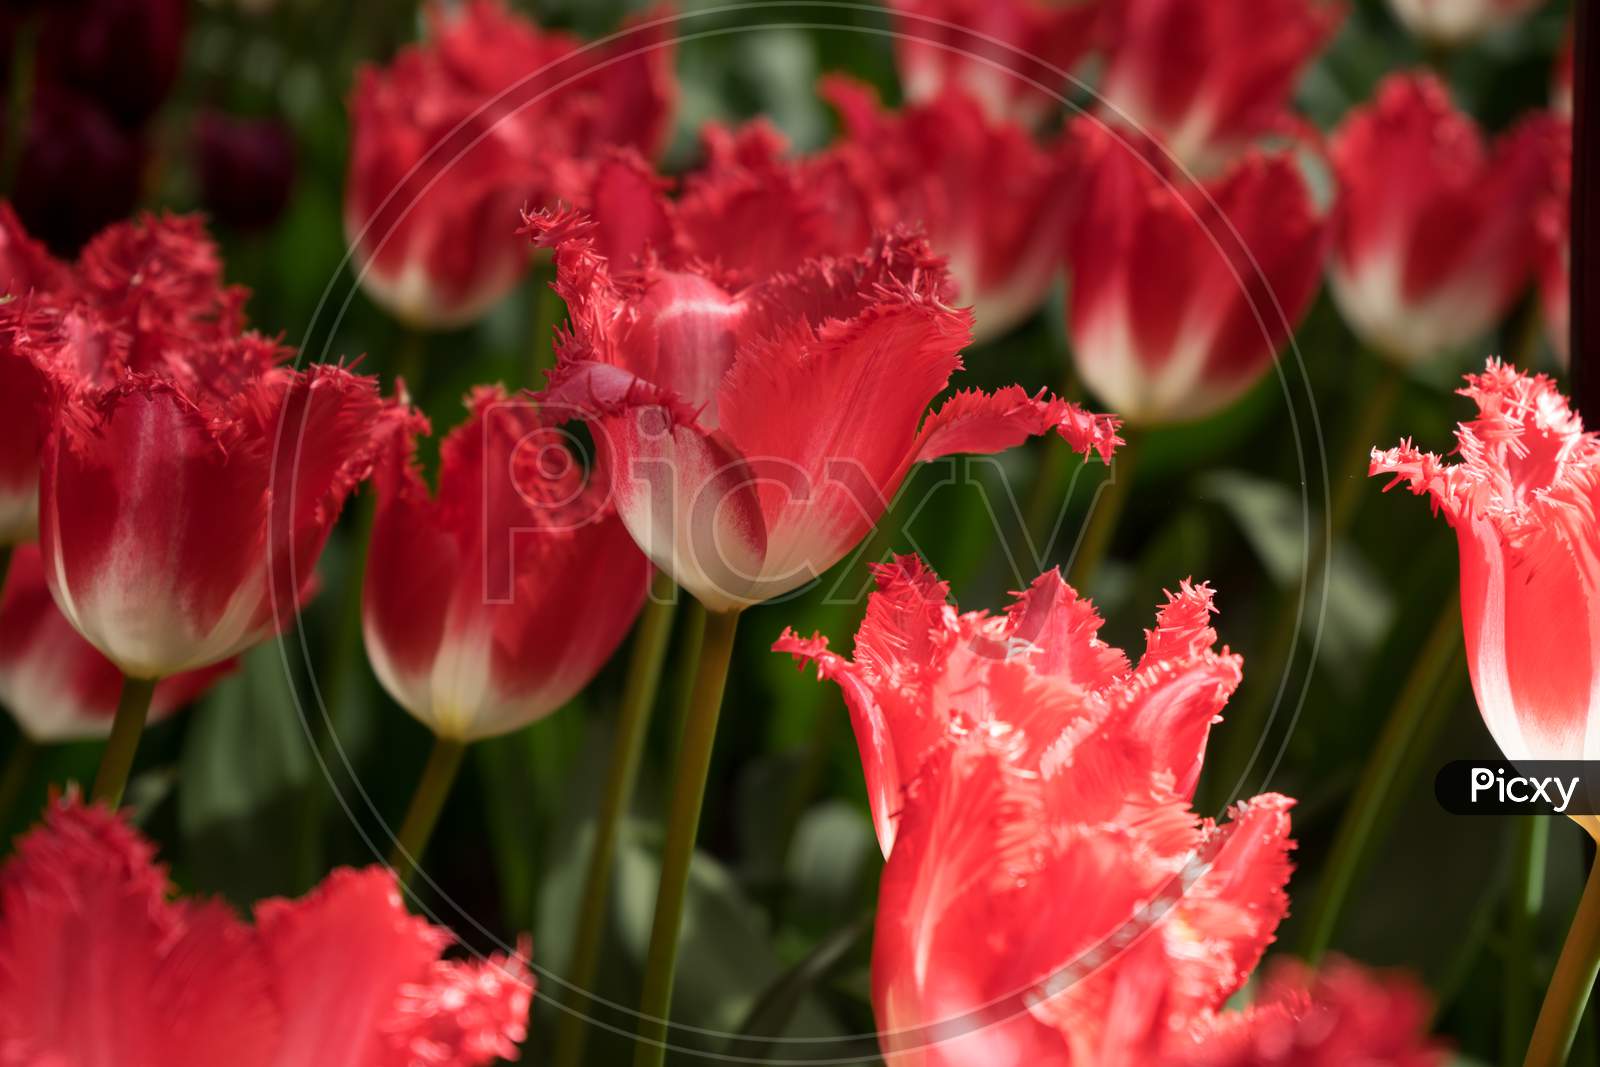 Red Color Tulip Flowers In A Garden In Lisse, Netherlands, Europe